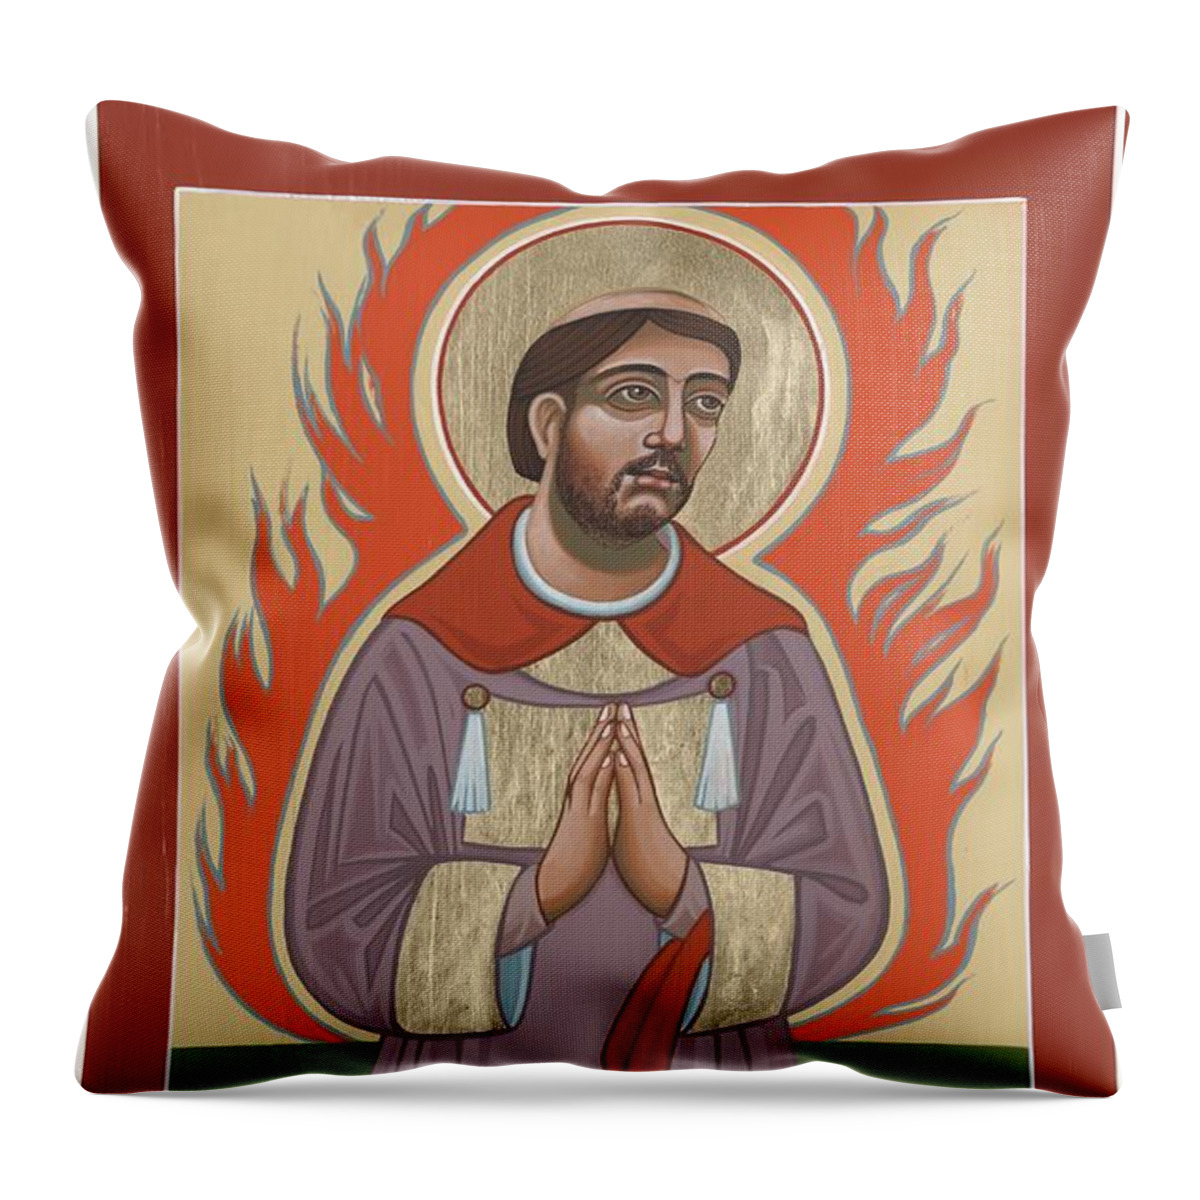 Look Closely At This Image Of San Lorenzo To See The Rough And Carved Wood Of This Retablo. Throw Pillow featuring the painting The Retablo of San Lorenzo del Fuego 253 by William Hart McNichols